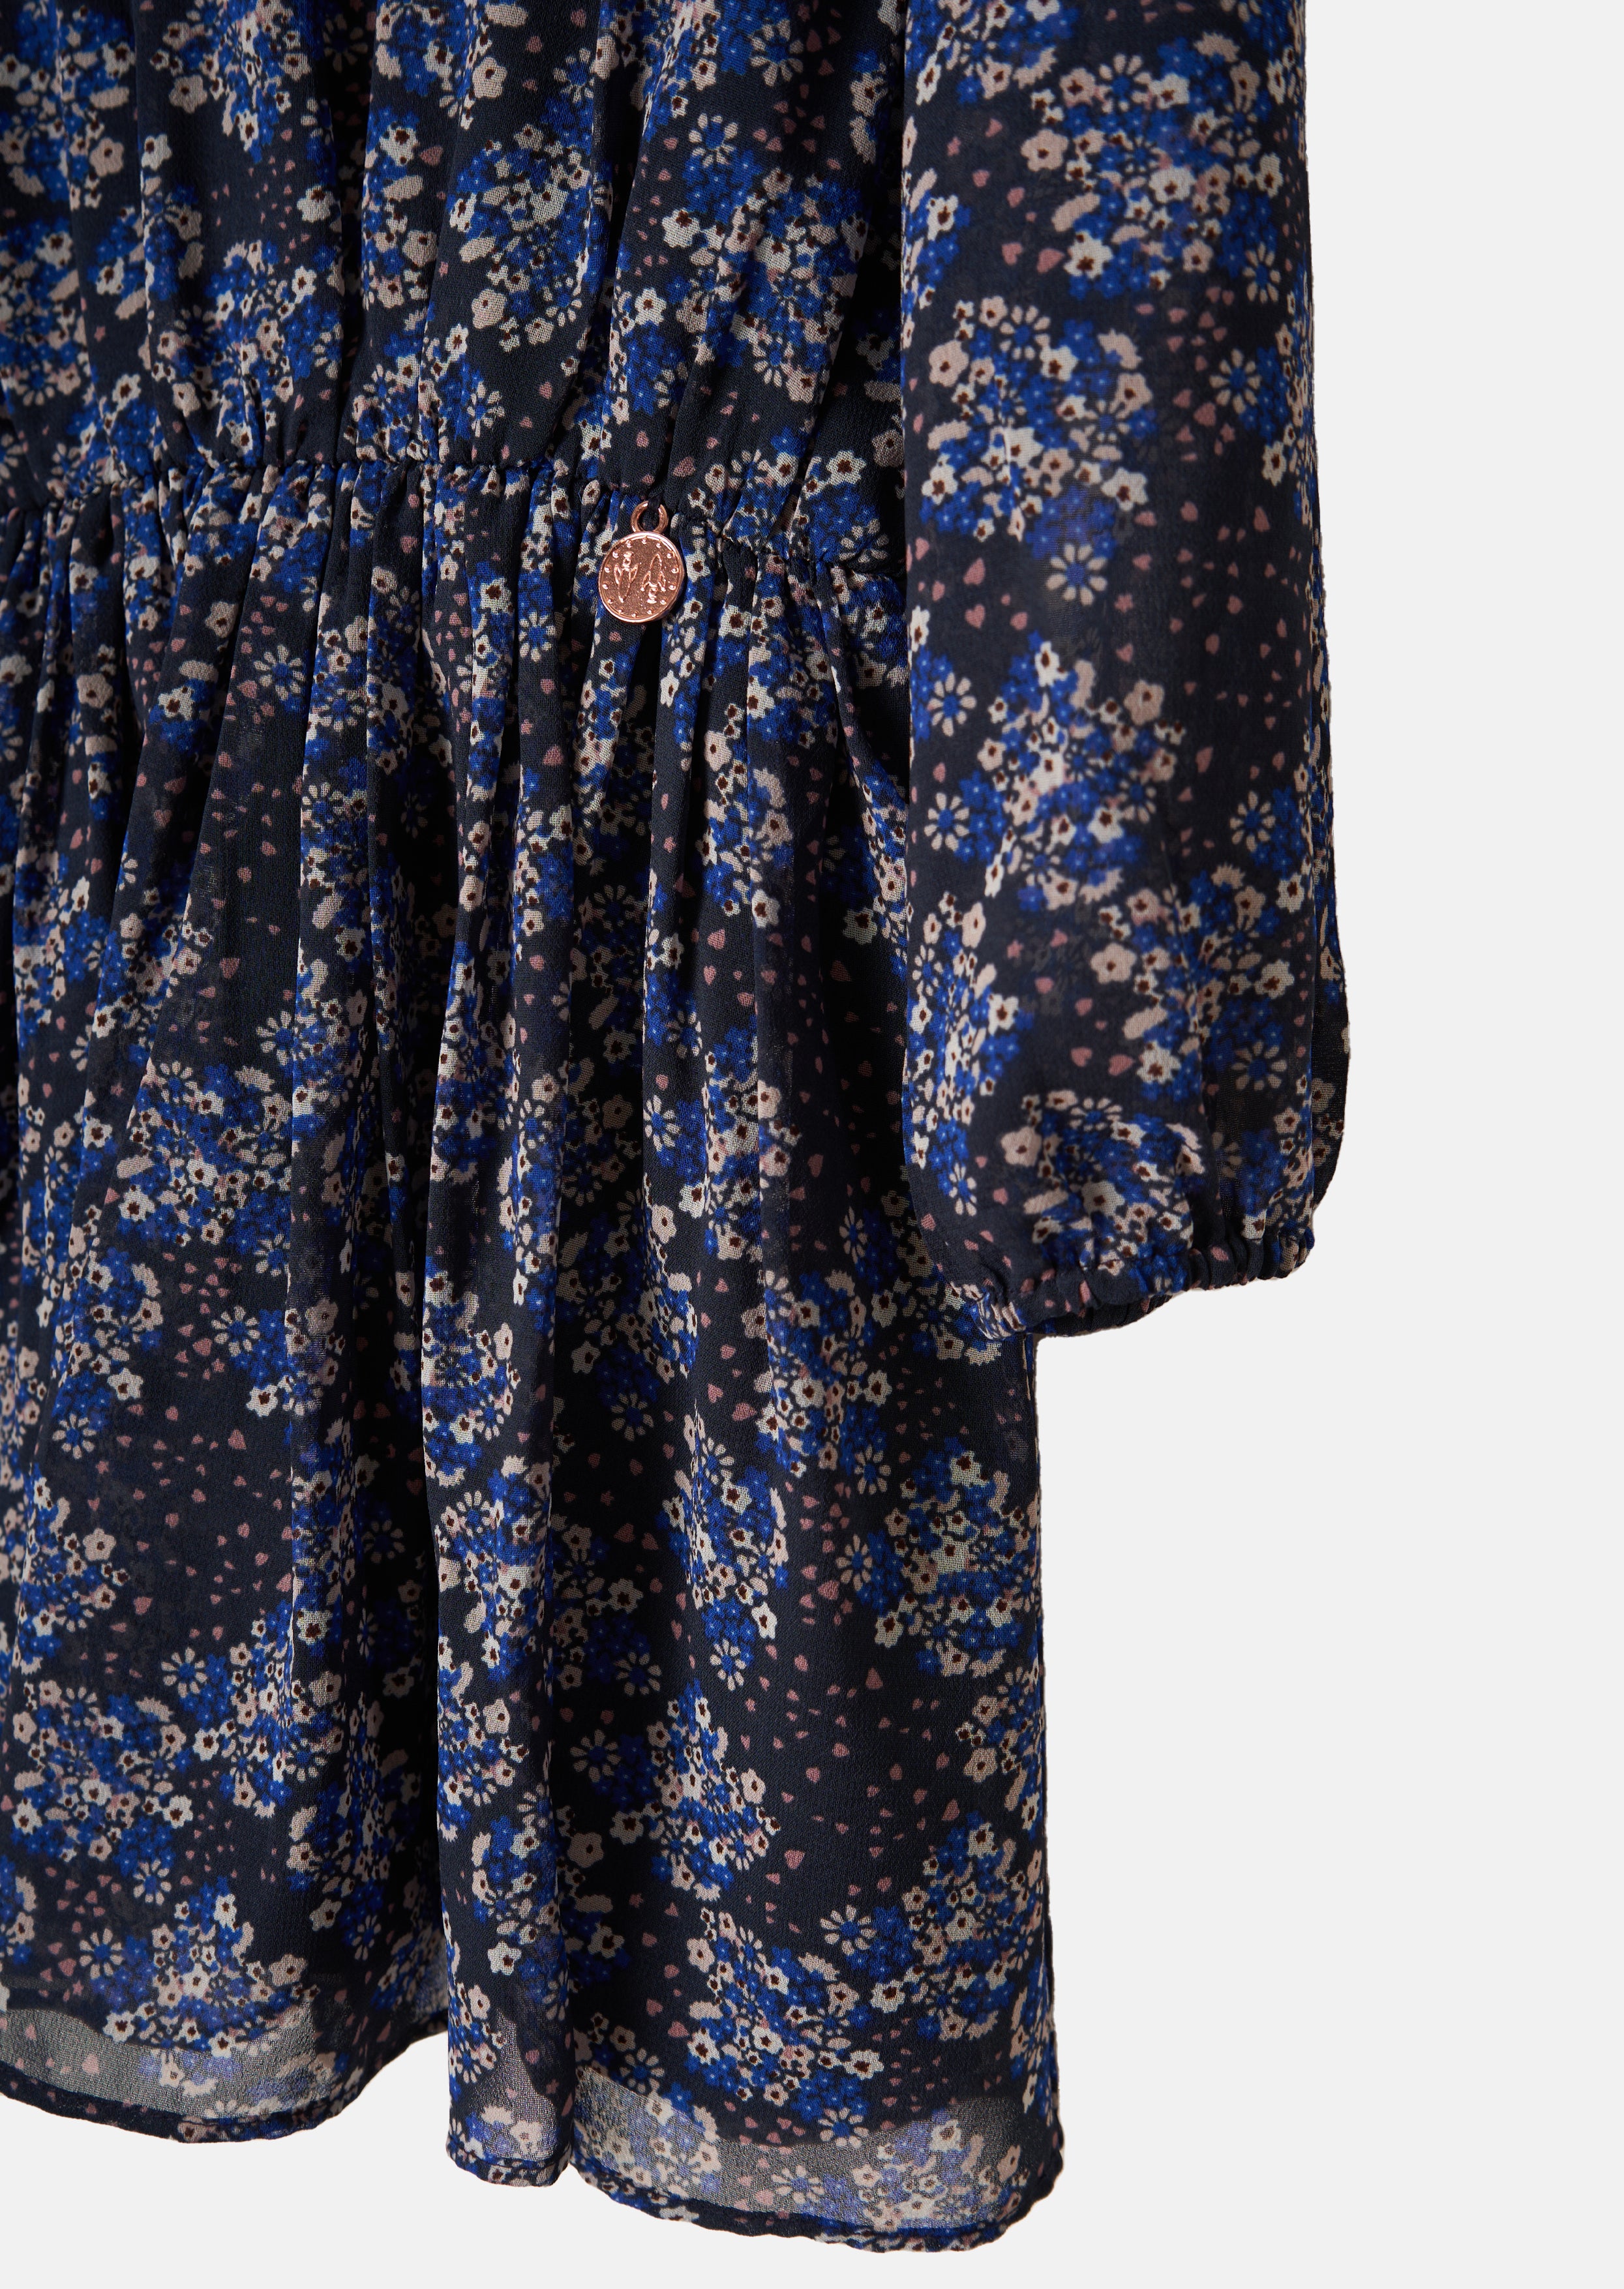 Girls Woven Navy Floral Printed Dress